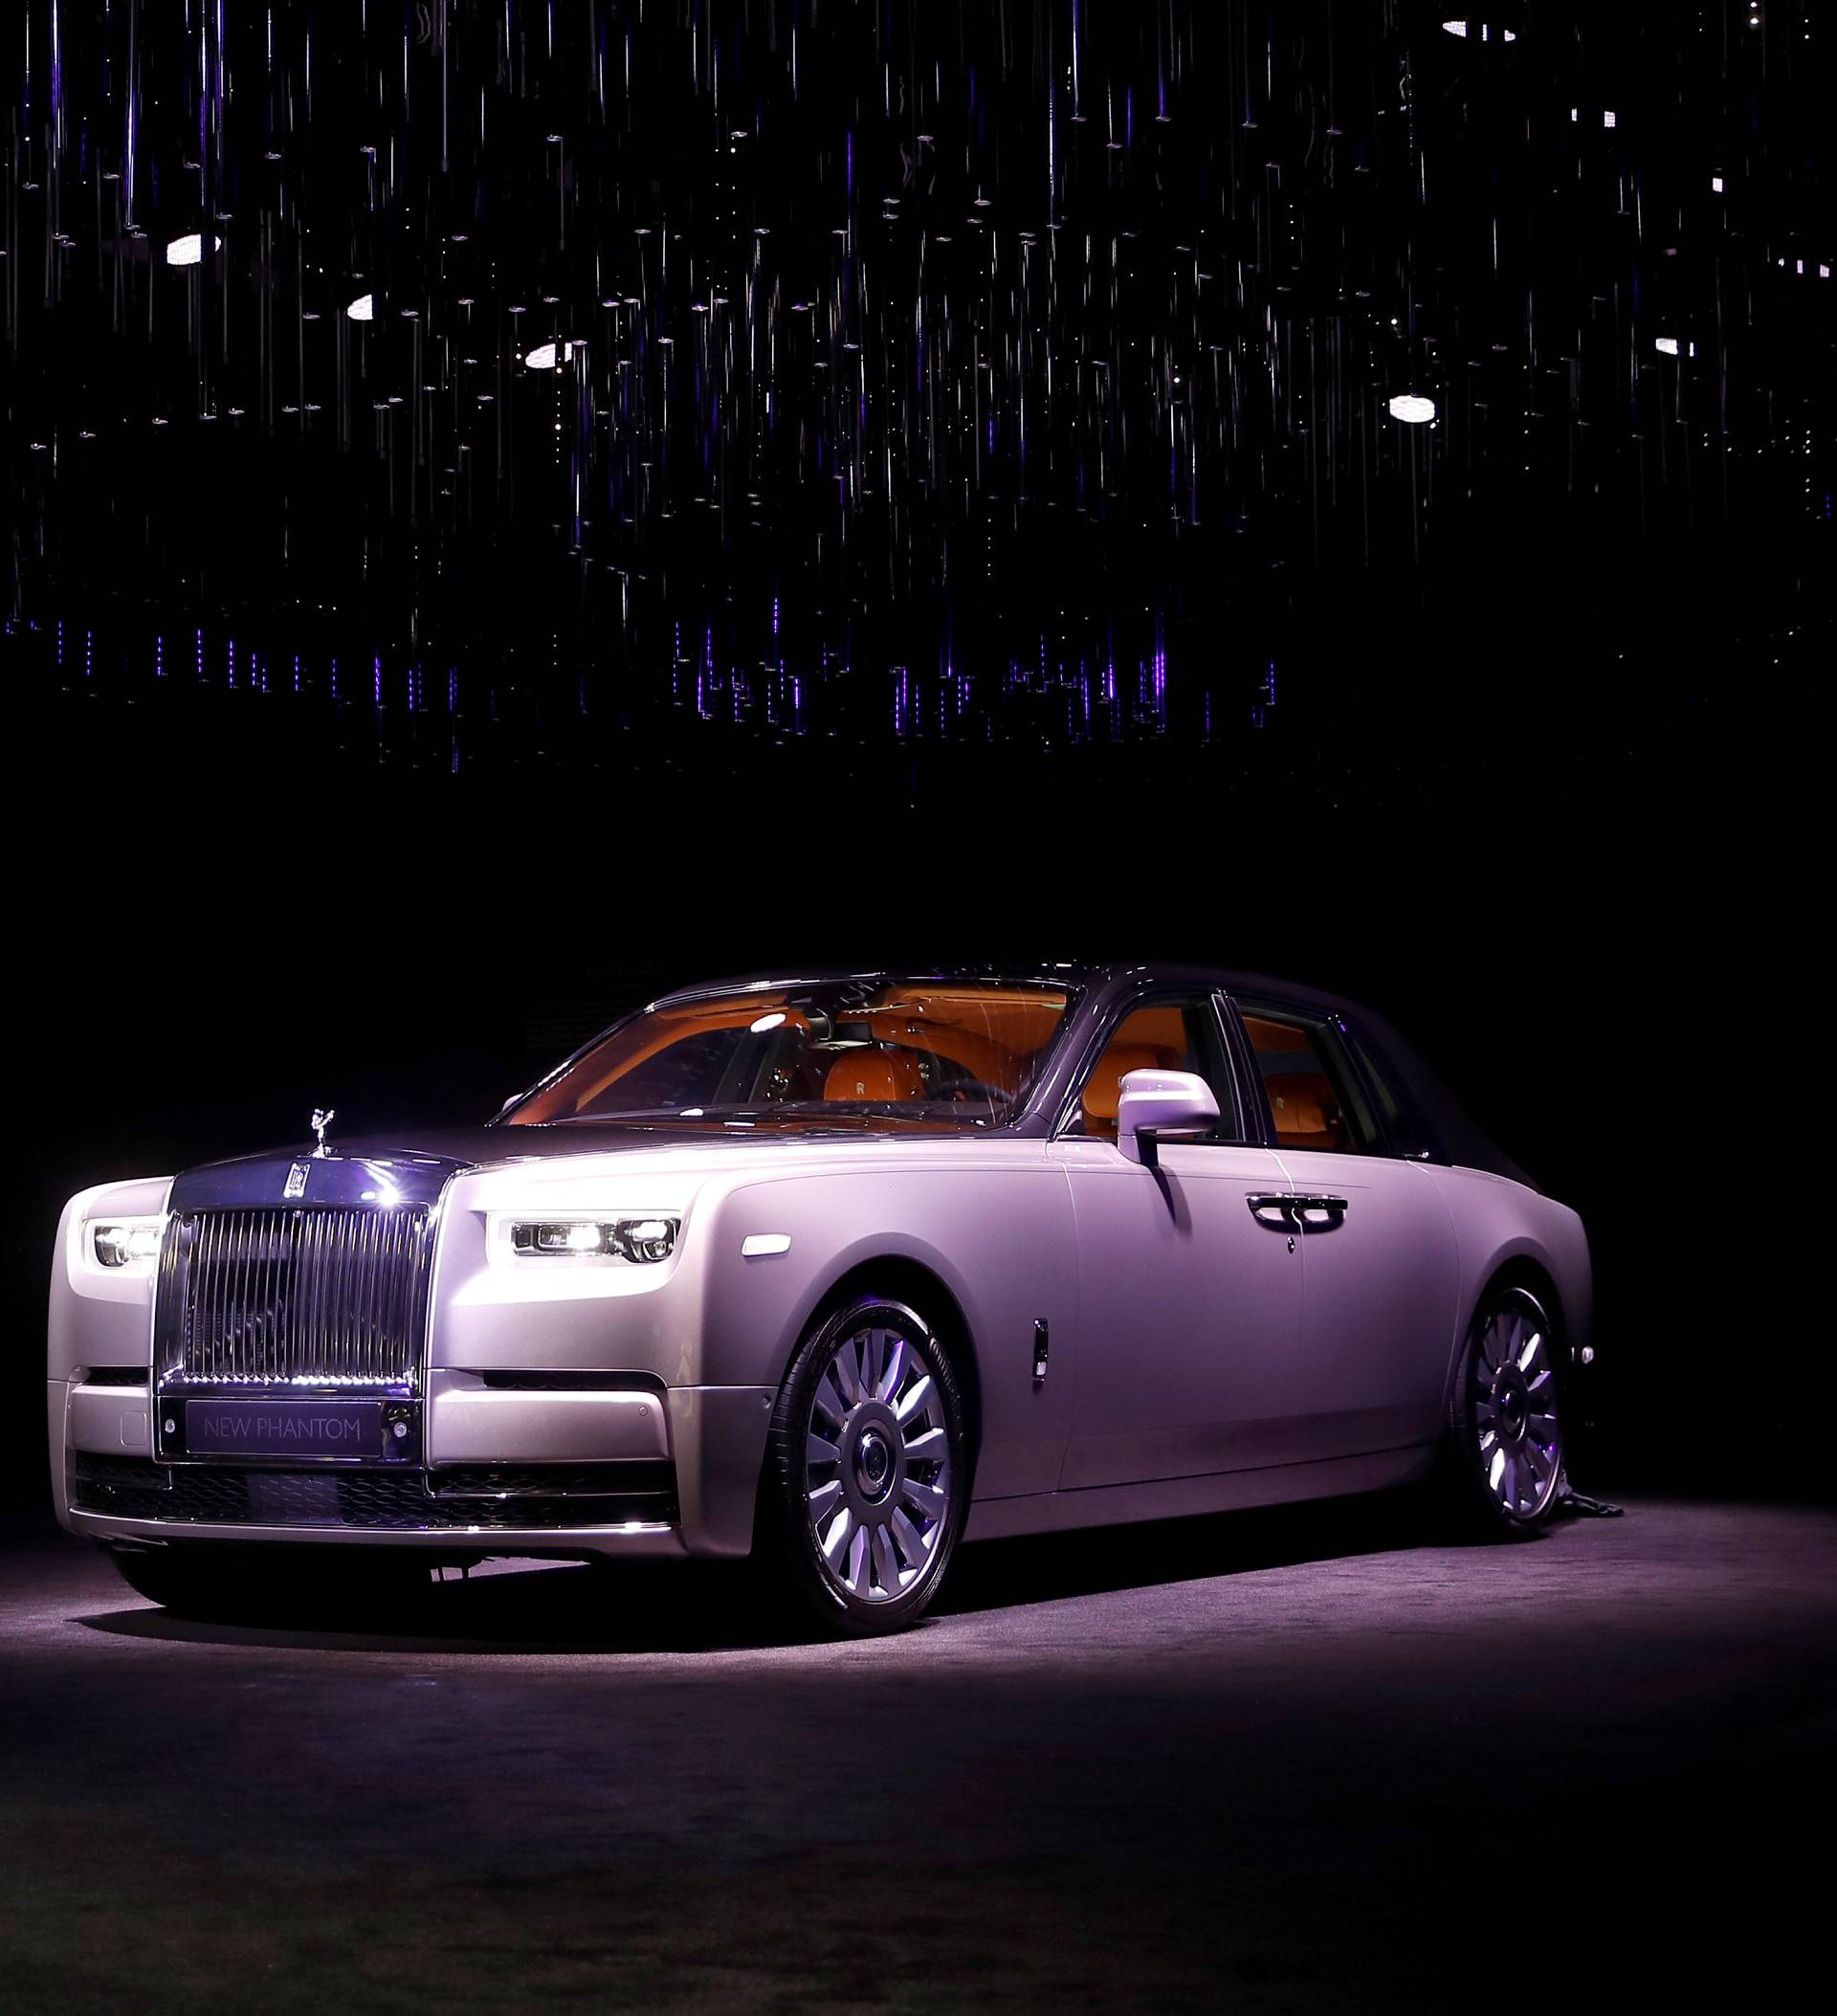 The new Rolls-Royce Phantom is premiered at an event at Bonhams and in conjunction with an exhibition of previous models of the car, in London